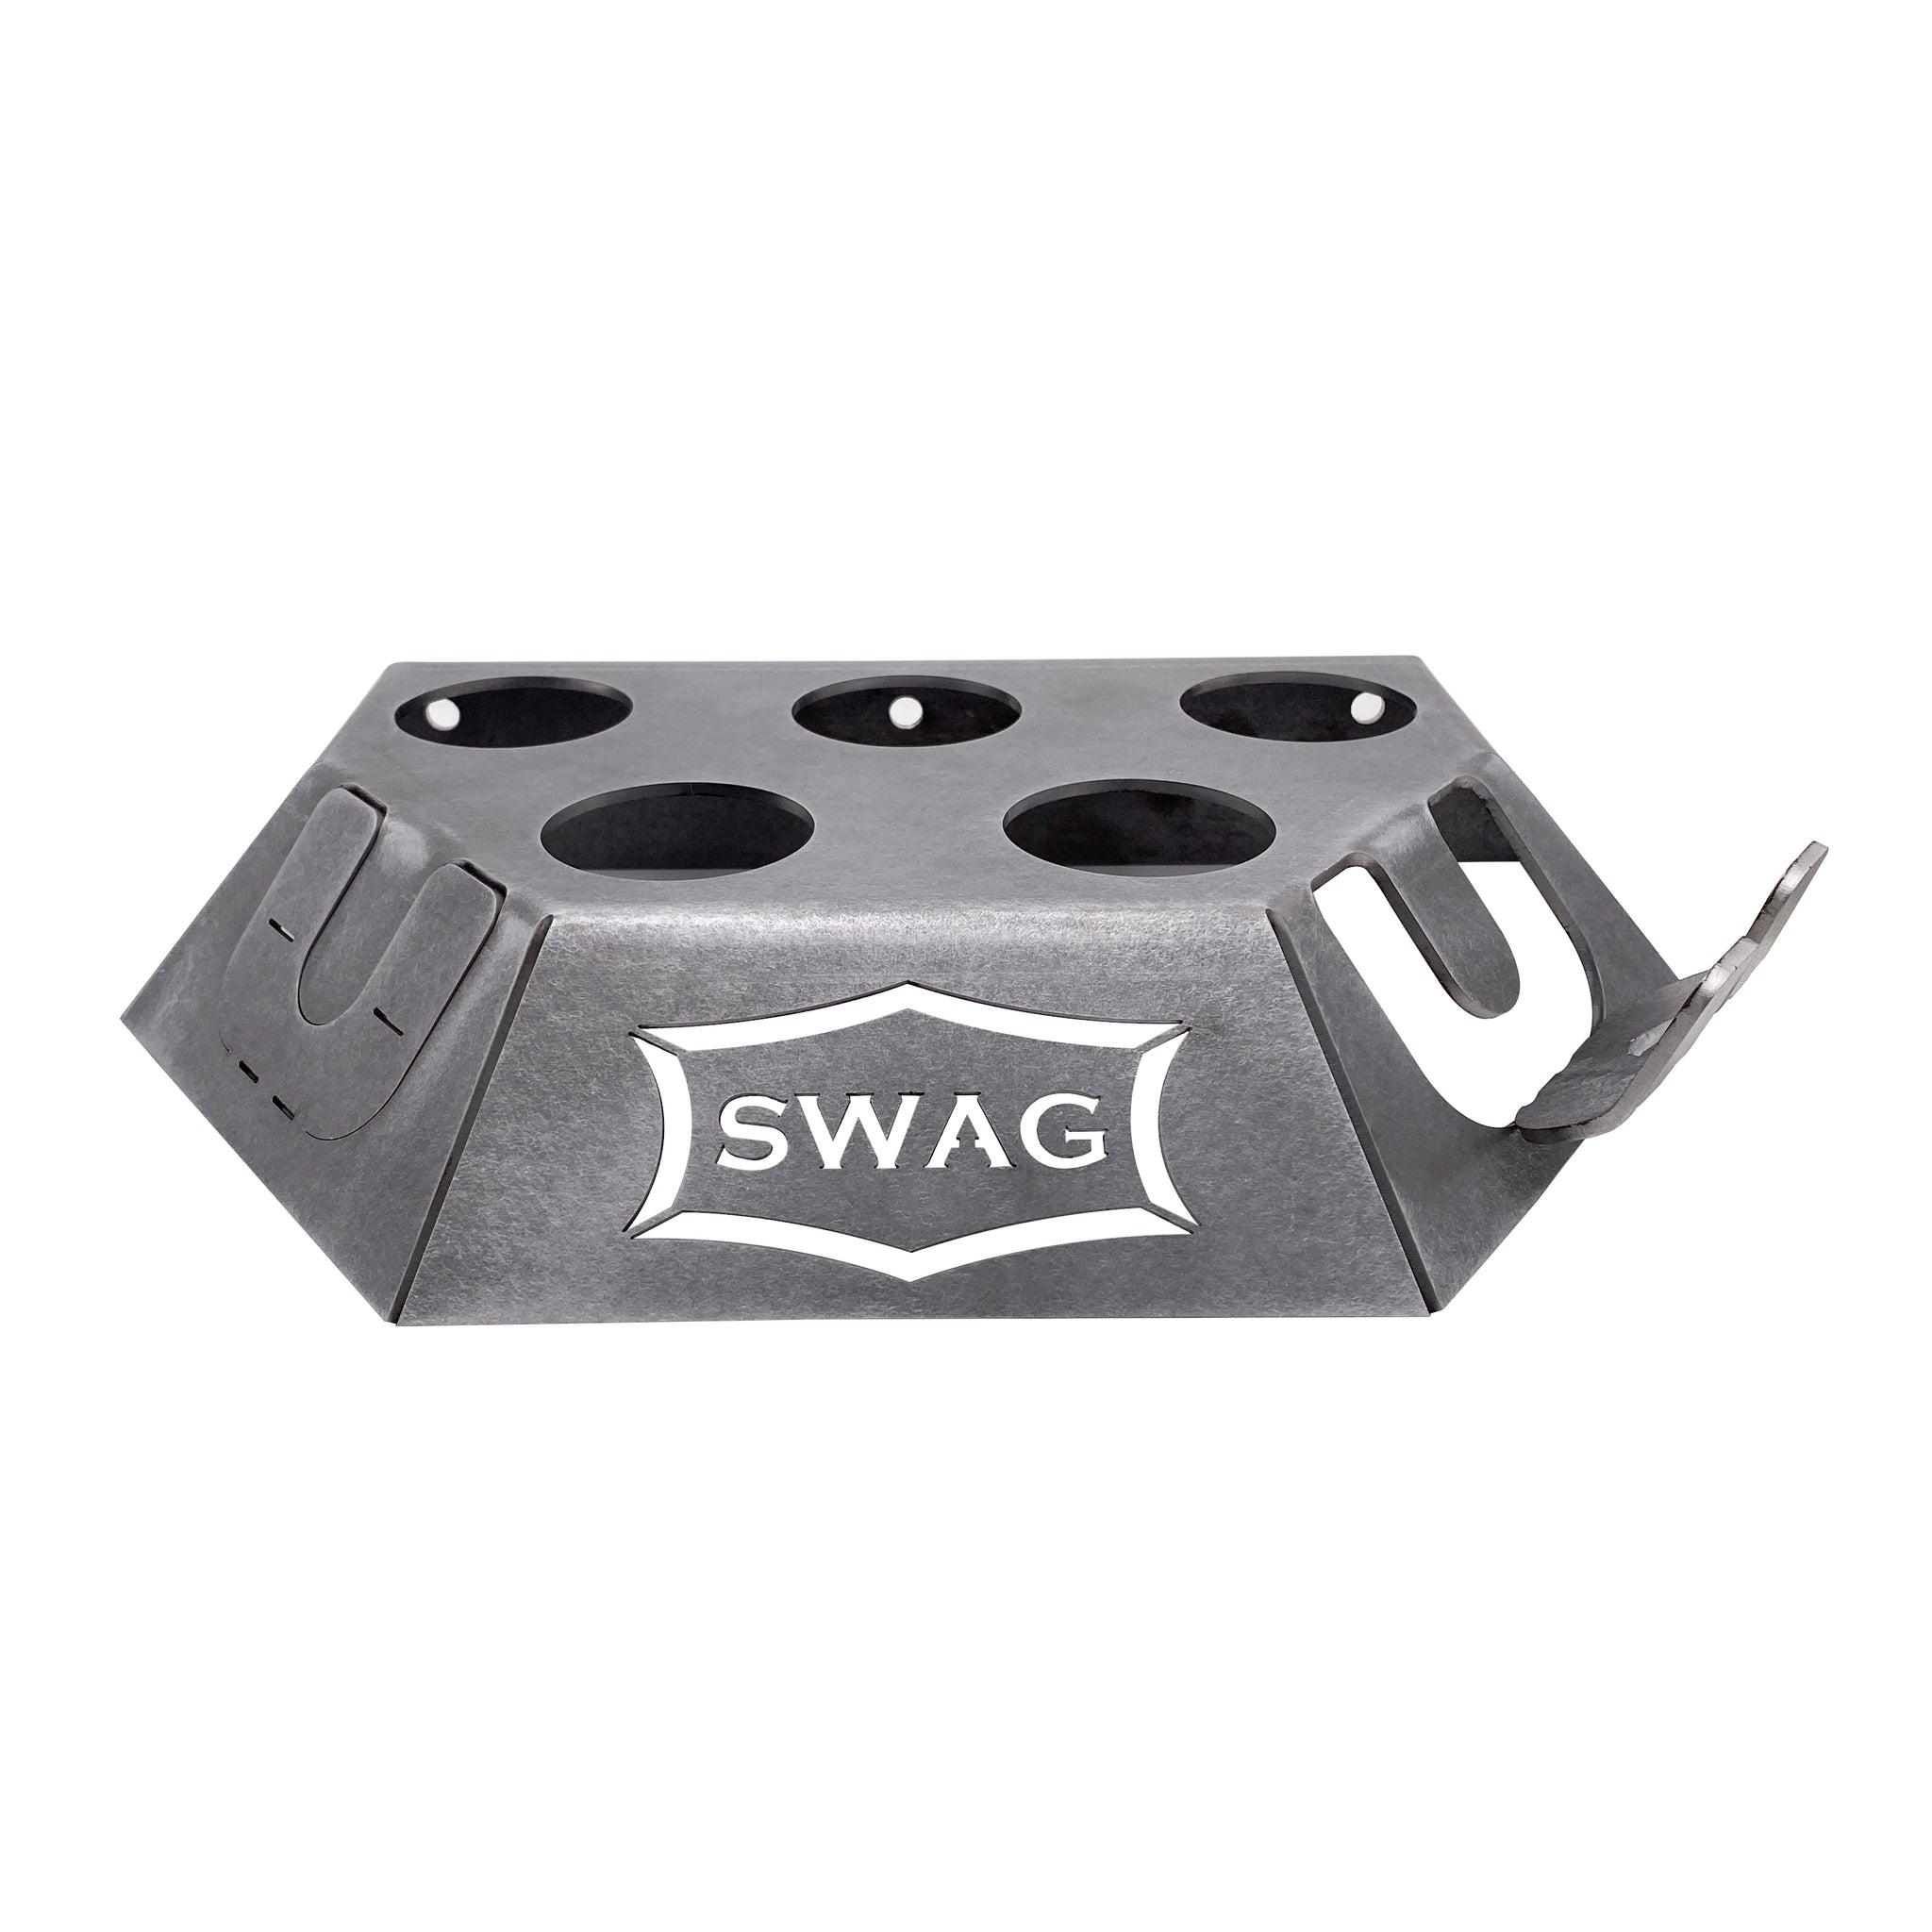 SWAG Welding Tig Rod Holder : Motorcycle Lift Tables, Stands, Chocks, &  Trailers, Plus Automotive 2 & 4 Post Lifts - FREE SHIPPING - FREE SHIPPING  FOR ~ 500 MILES